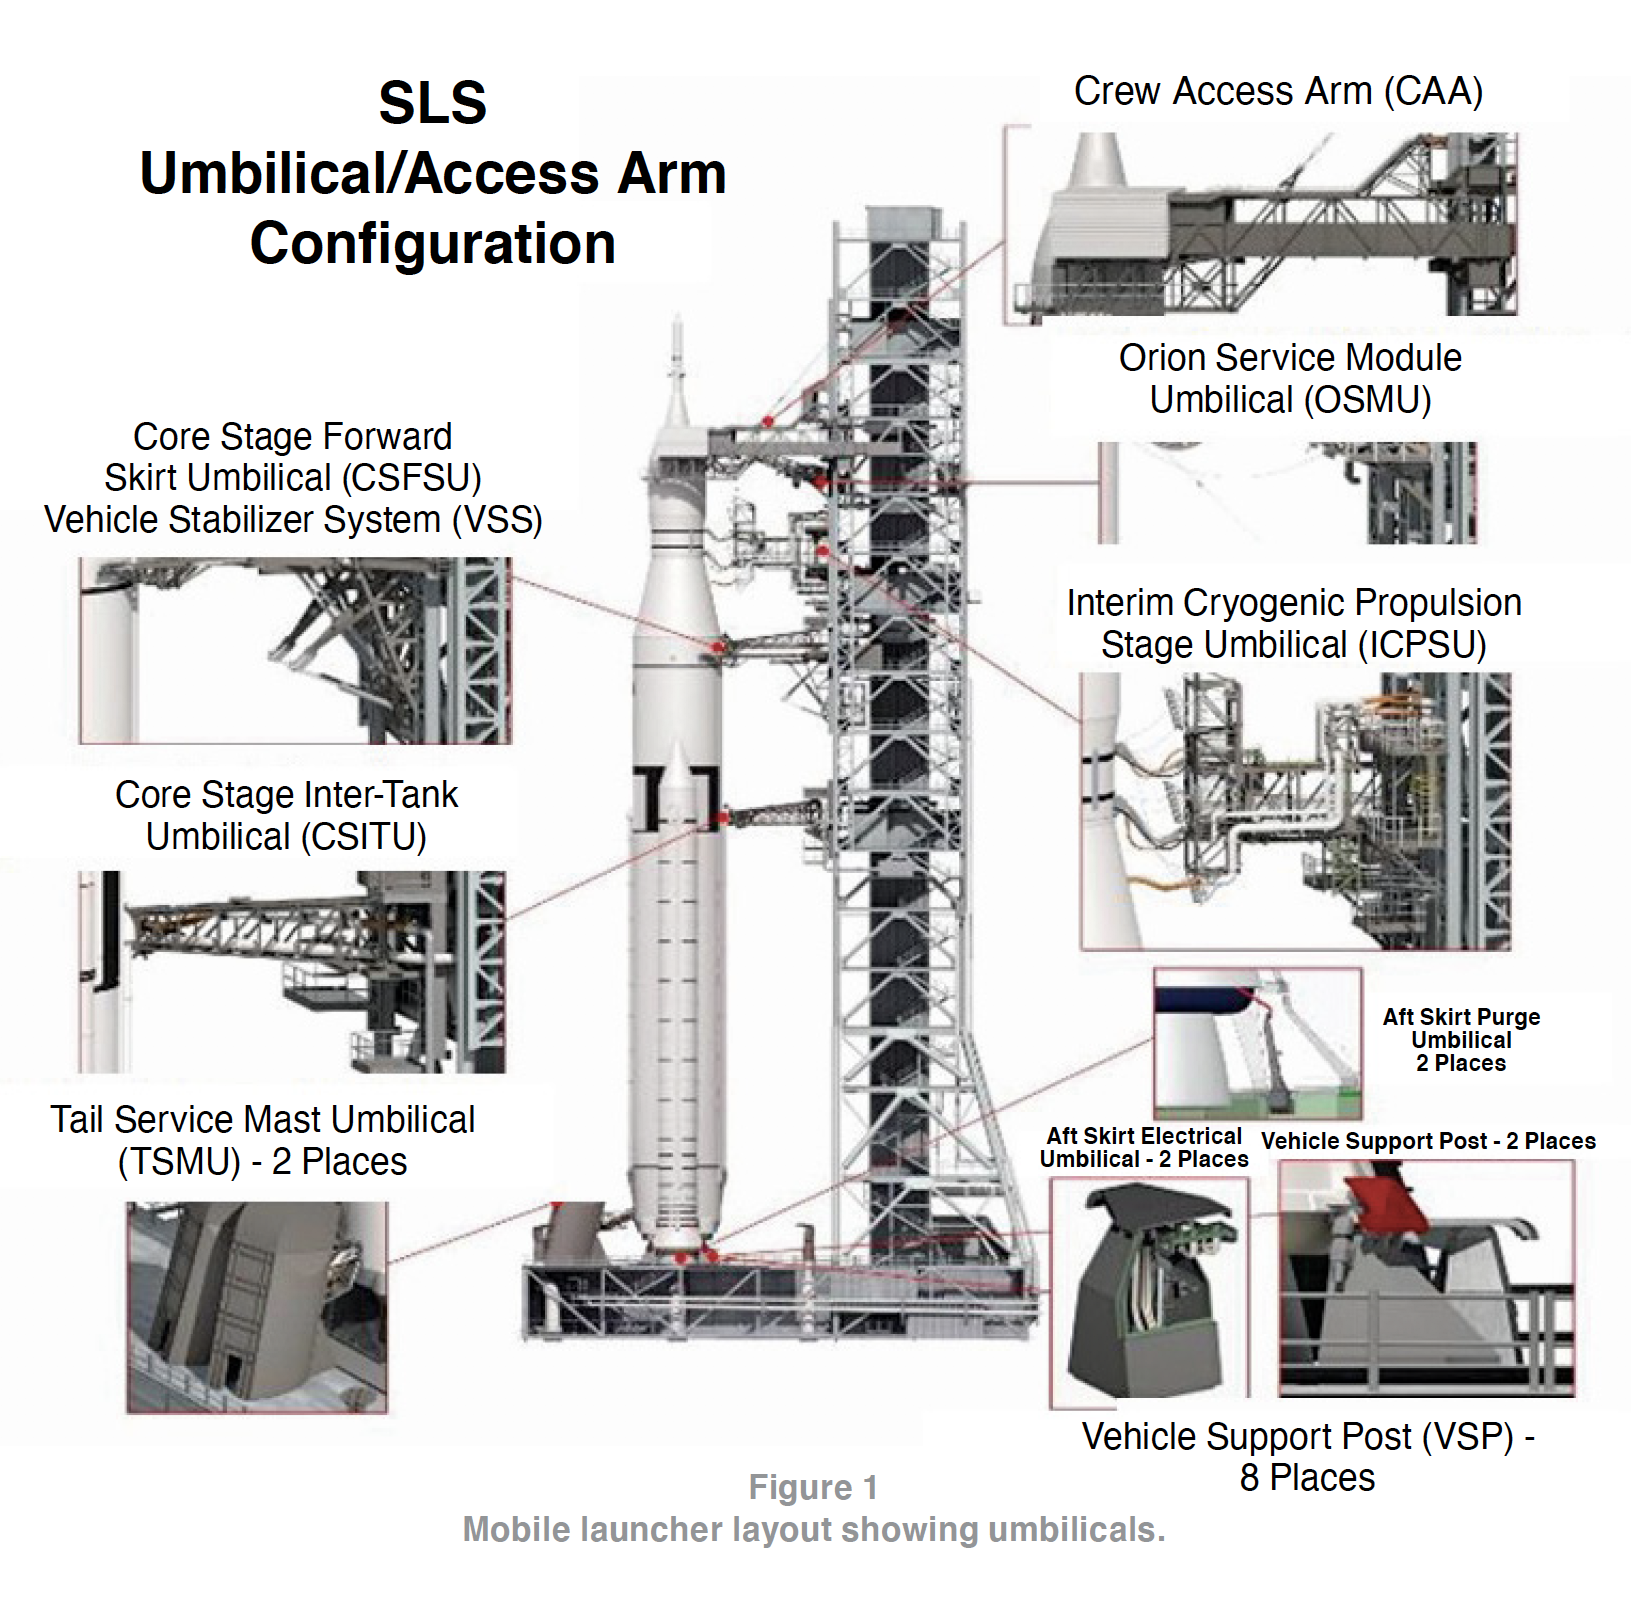 Figure 1: Mobile launcher layout showing umbilicals.